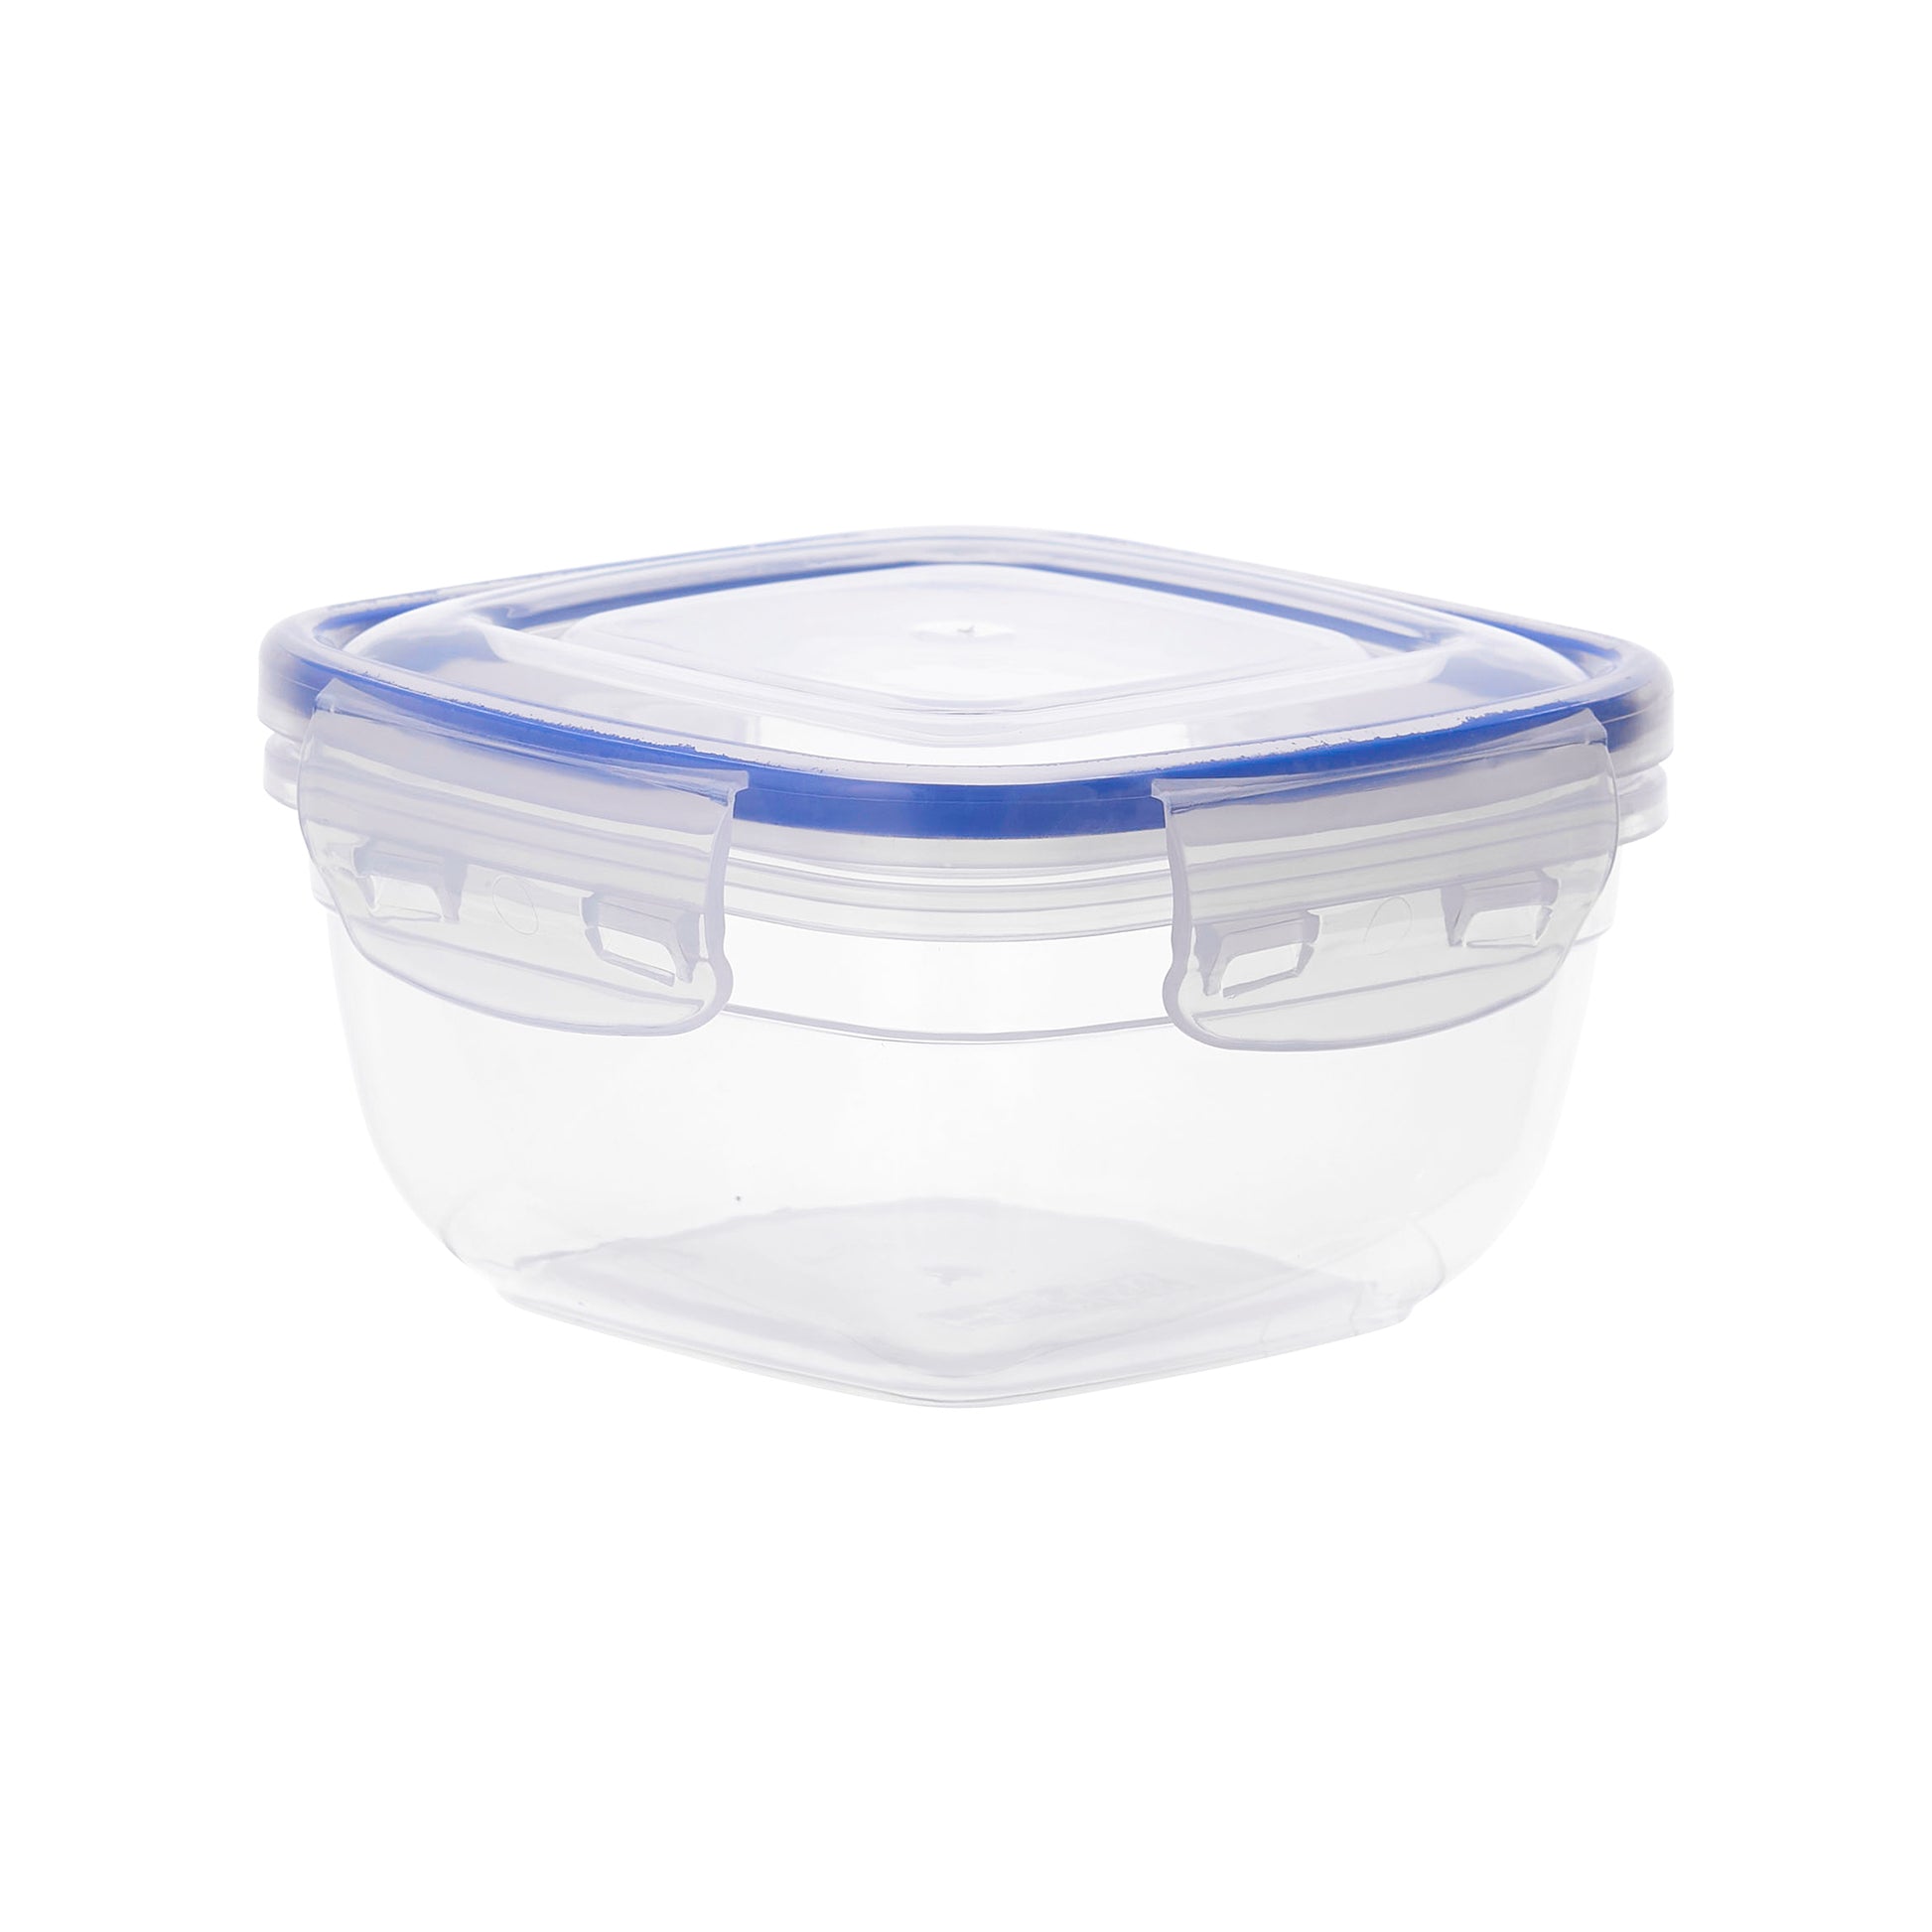  Superio Storage Bins with Lids- Clear Boxes for